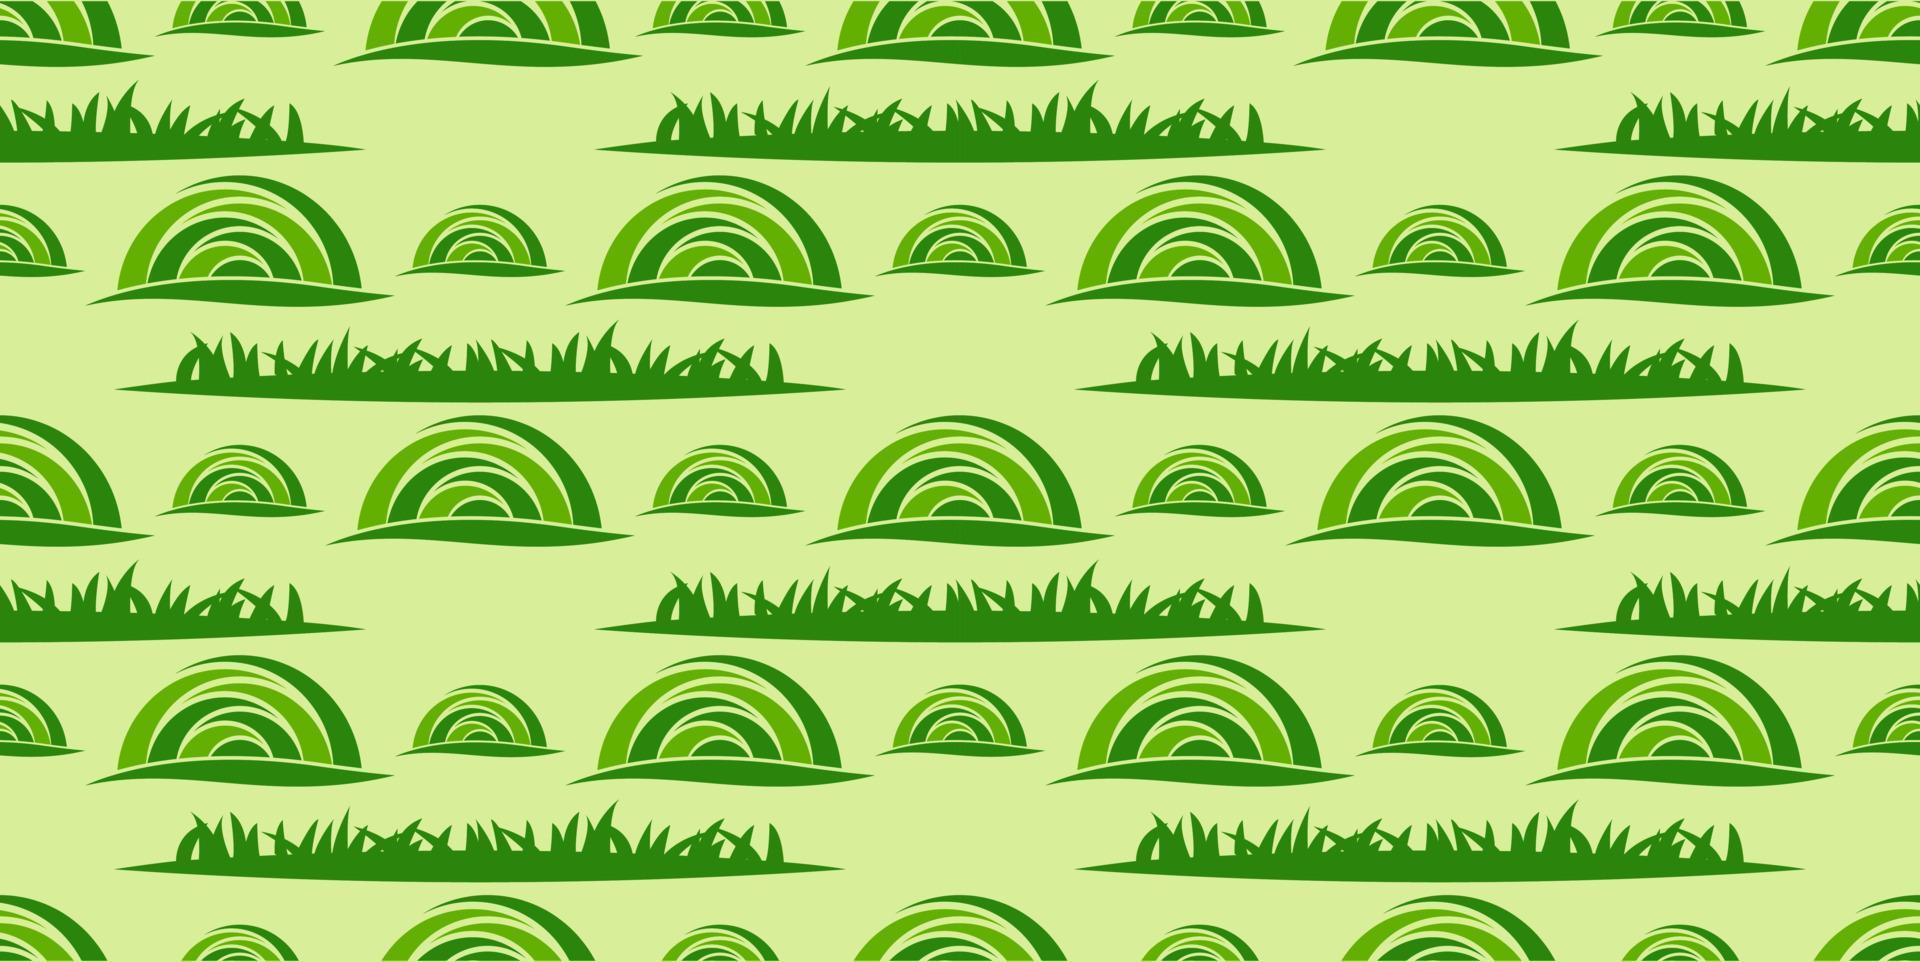 pattern grass. meadow graphic design background. vector